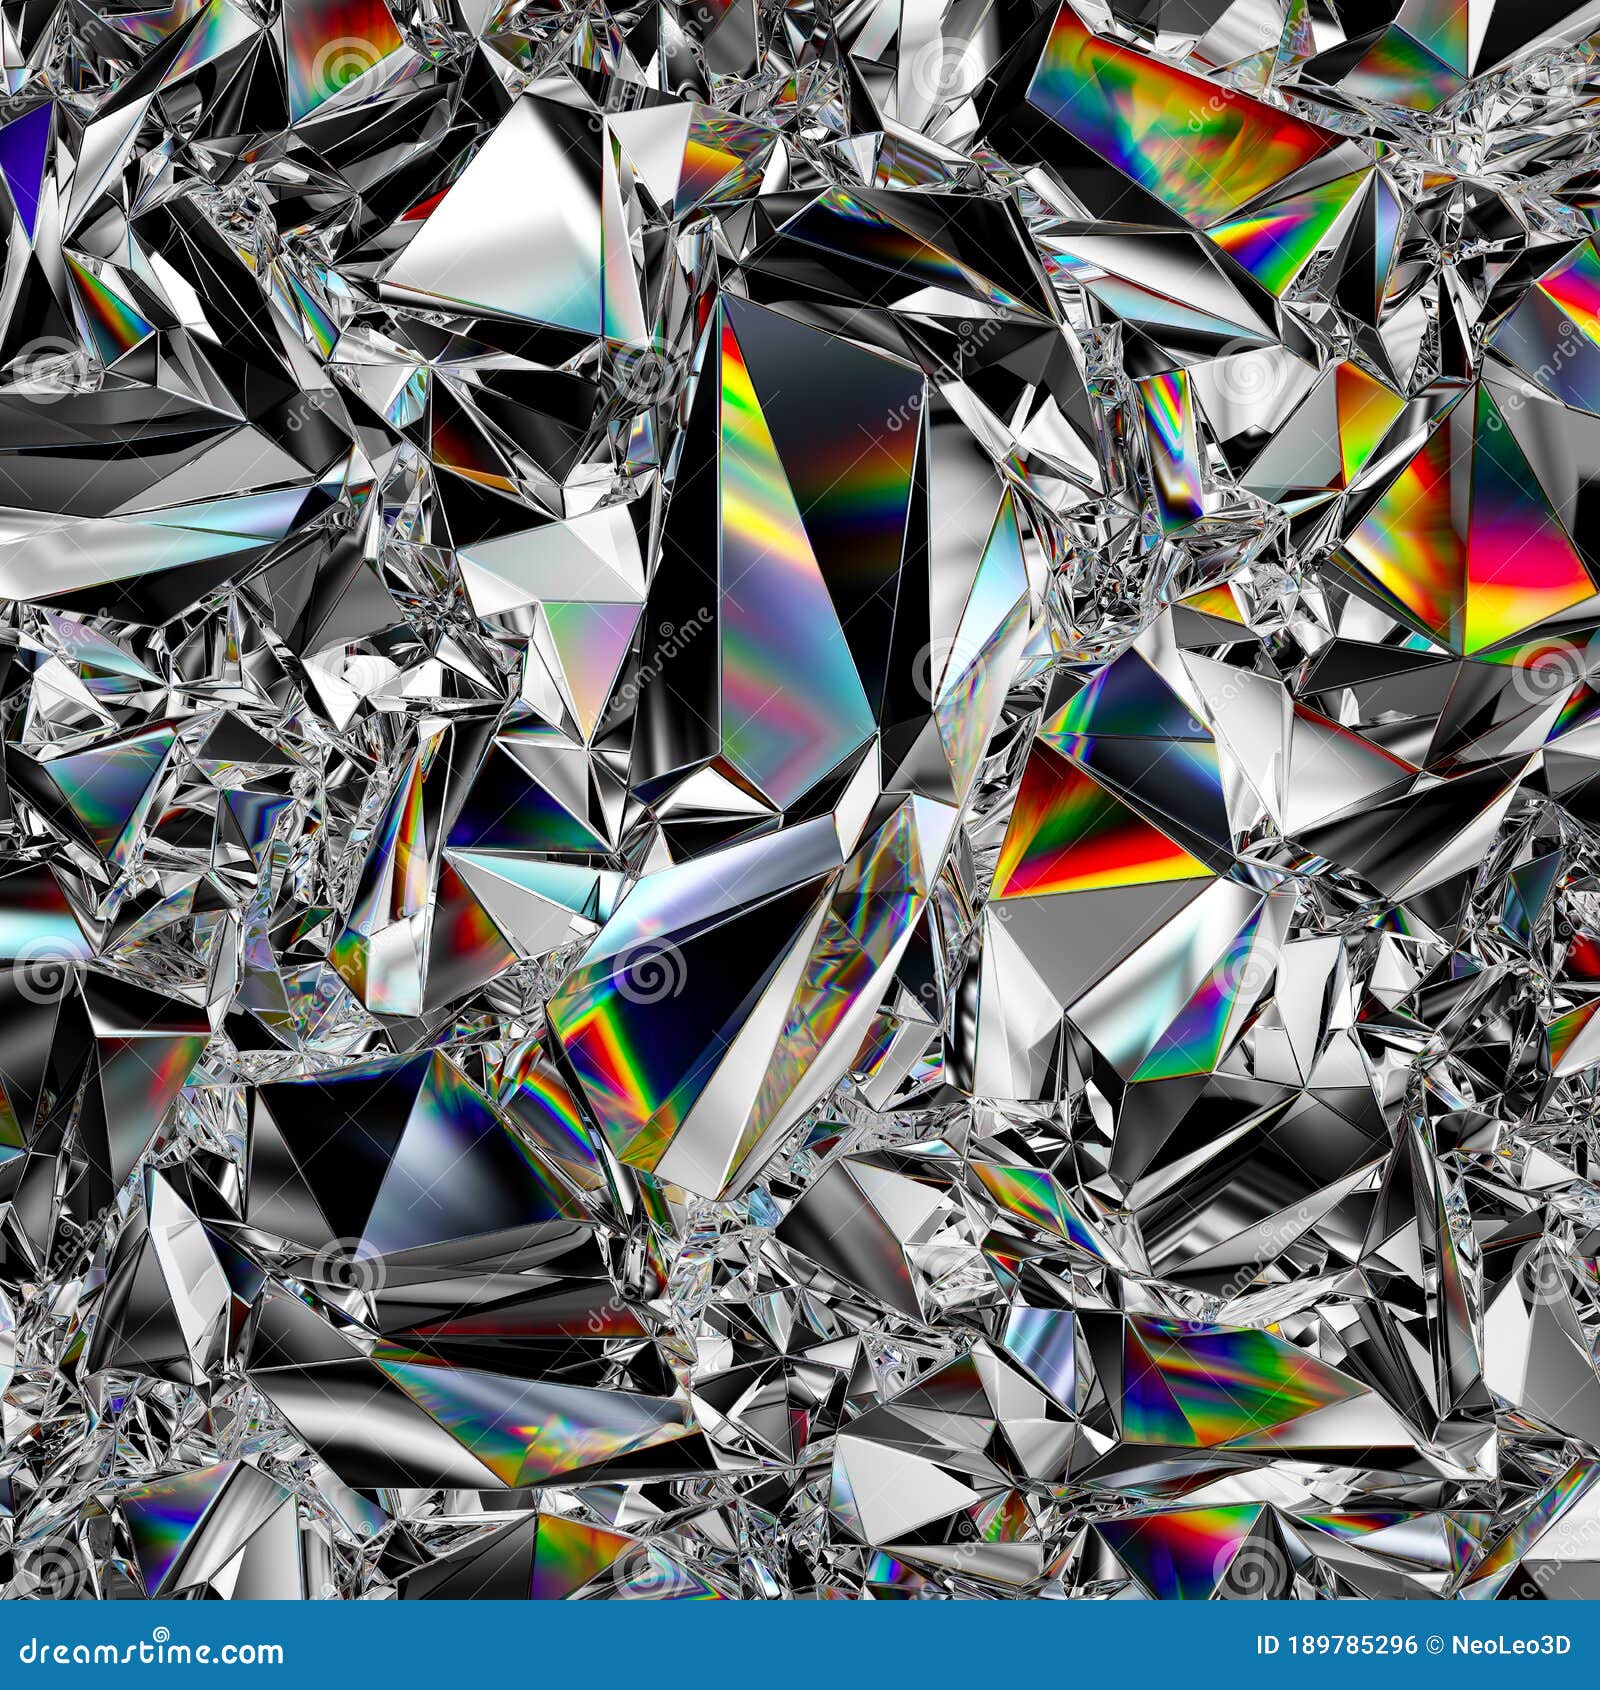 20 Artistic Crystal HD Wallpapers and Backgrounds